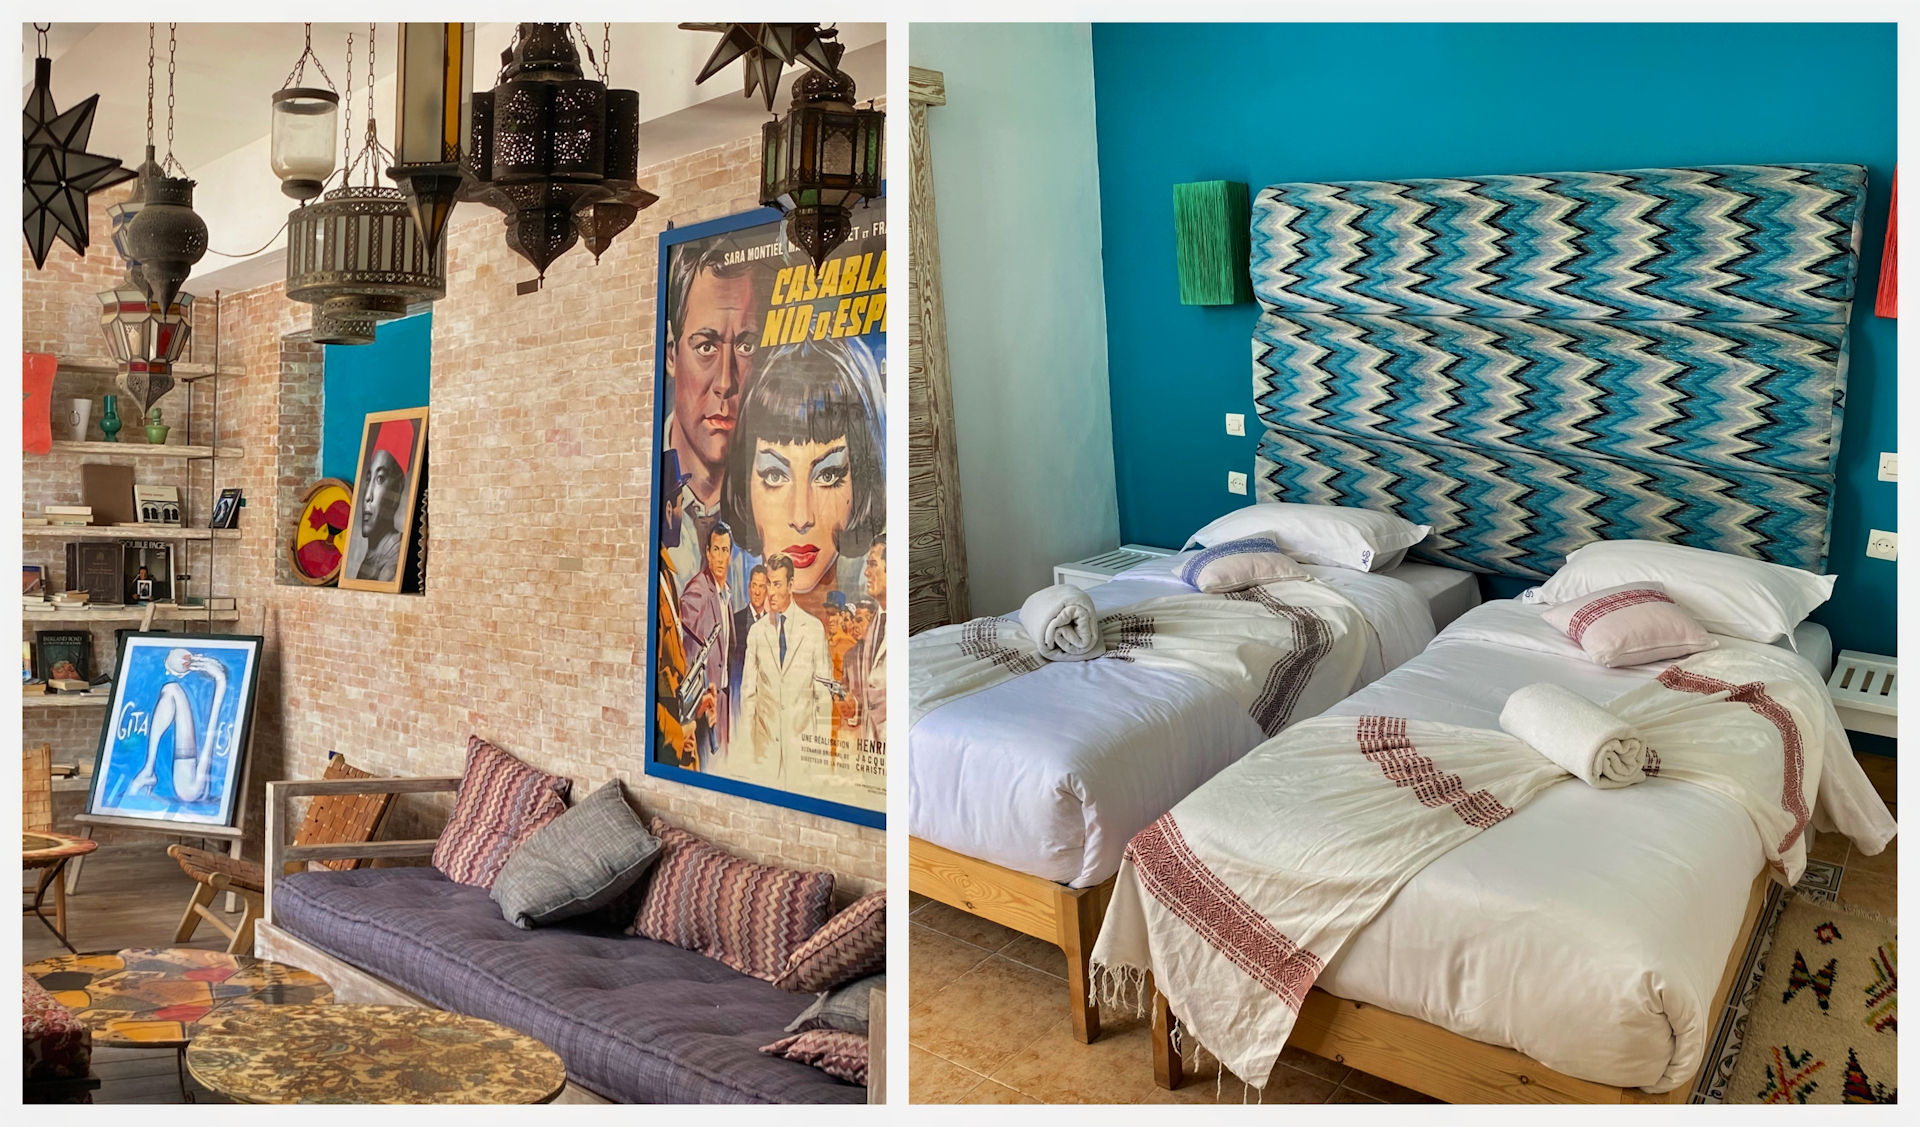 Interior shots of Mama Souri hotel, including reception area with vintage movie posters and bedroom with two single beds draped in white linens